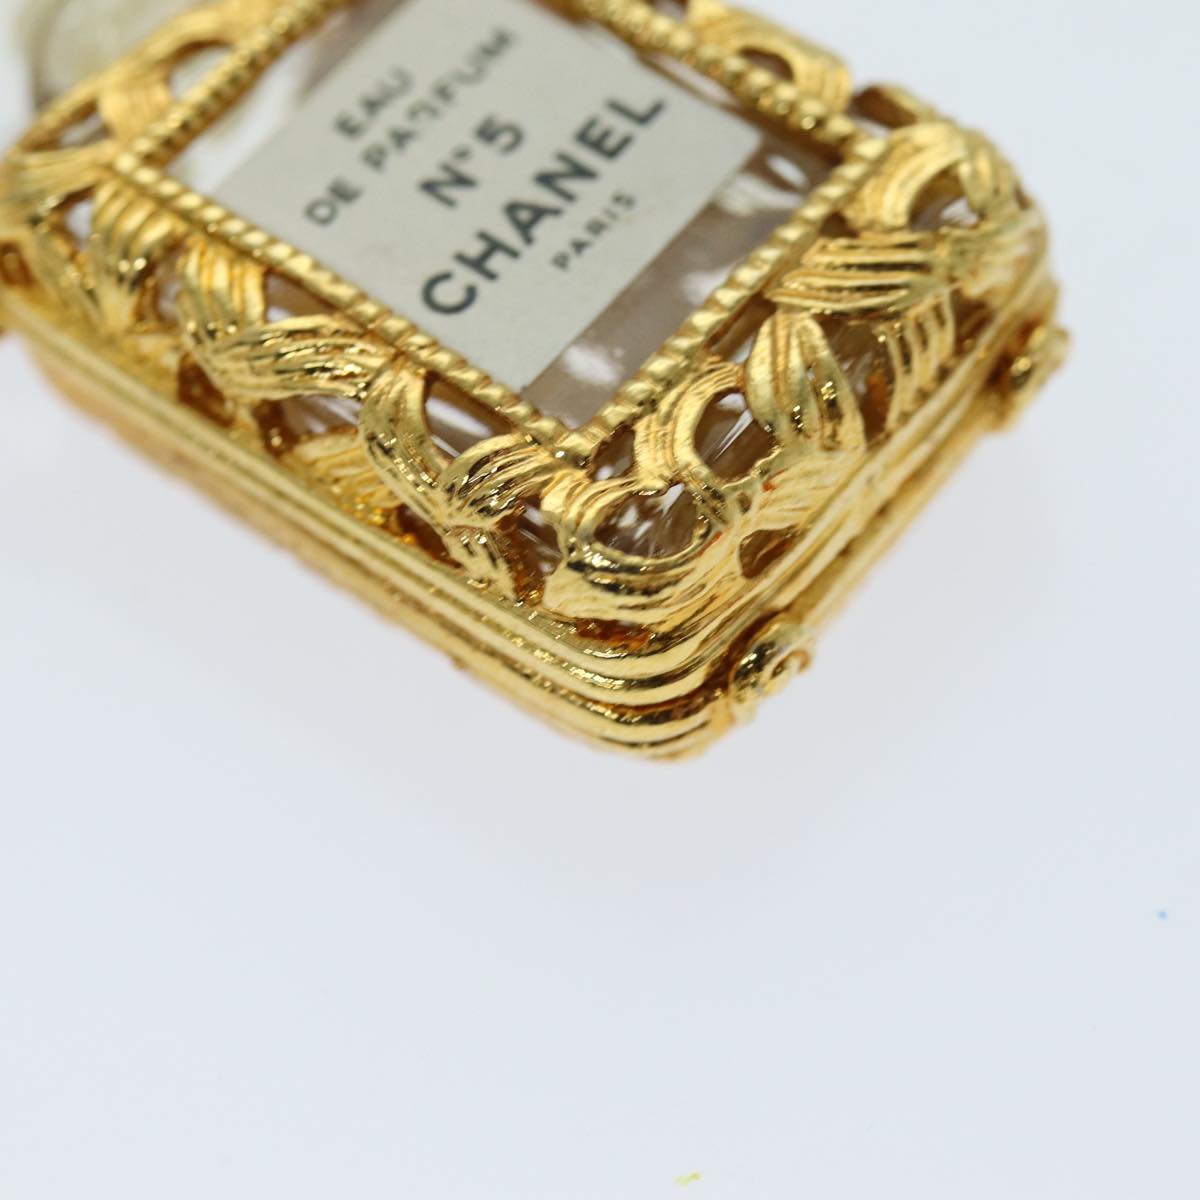 CHANEL Perfume N°5 Necklace metal Gold CC Auth bs13937